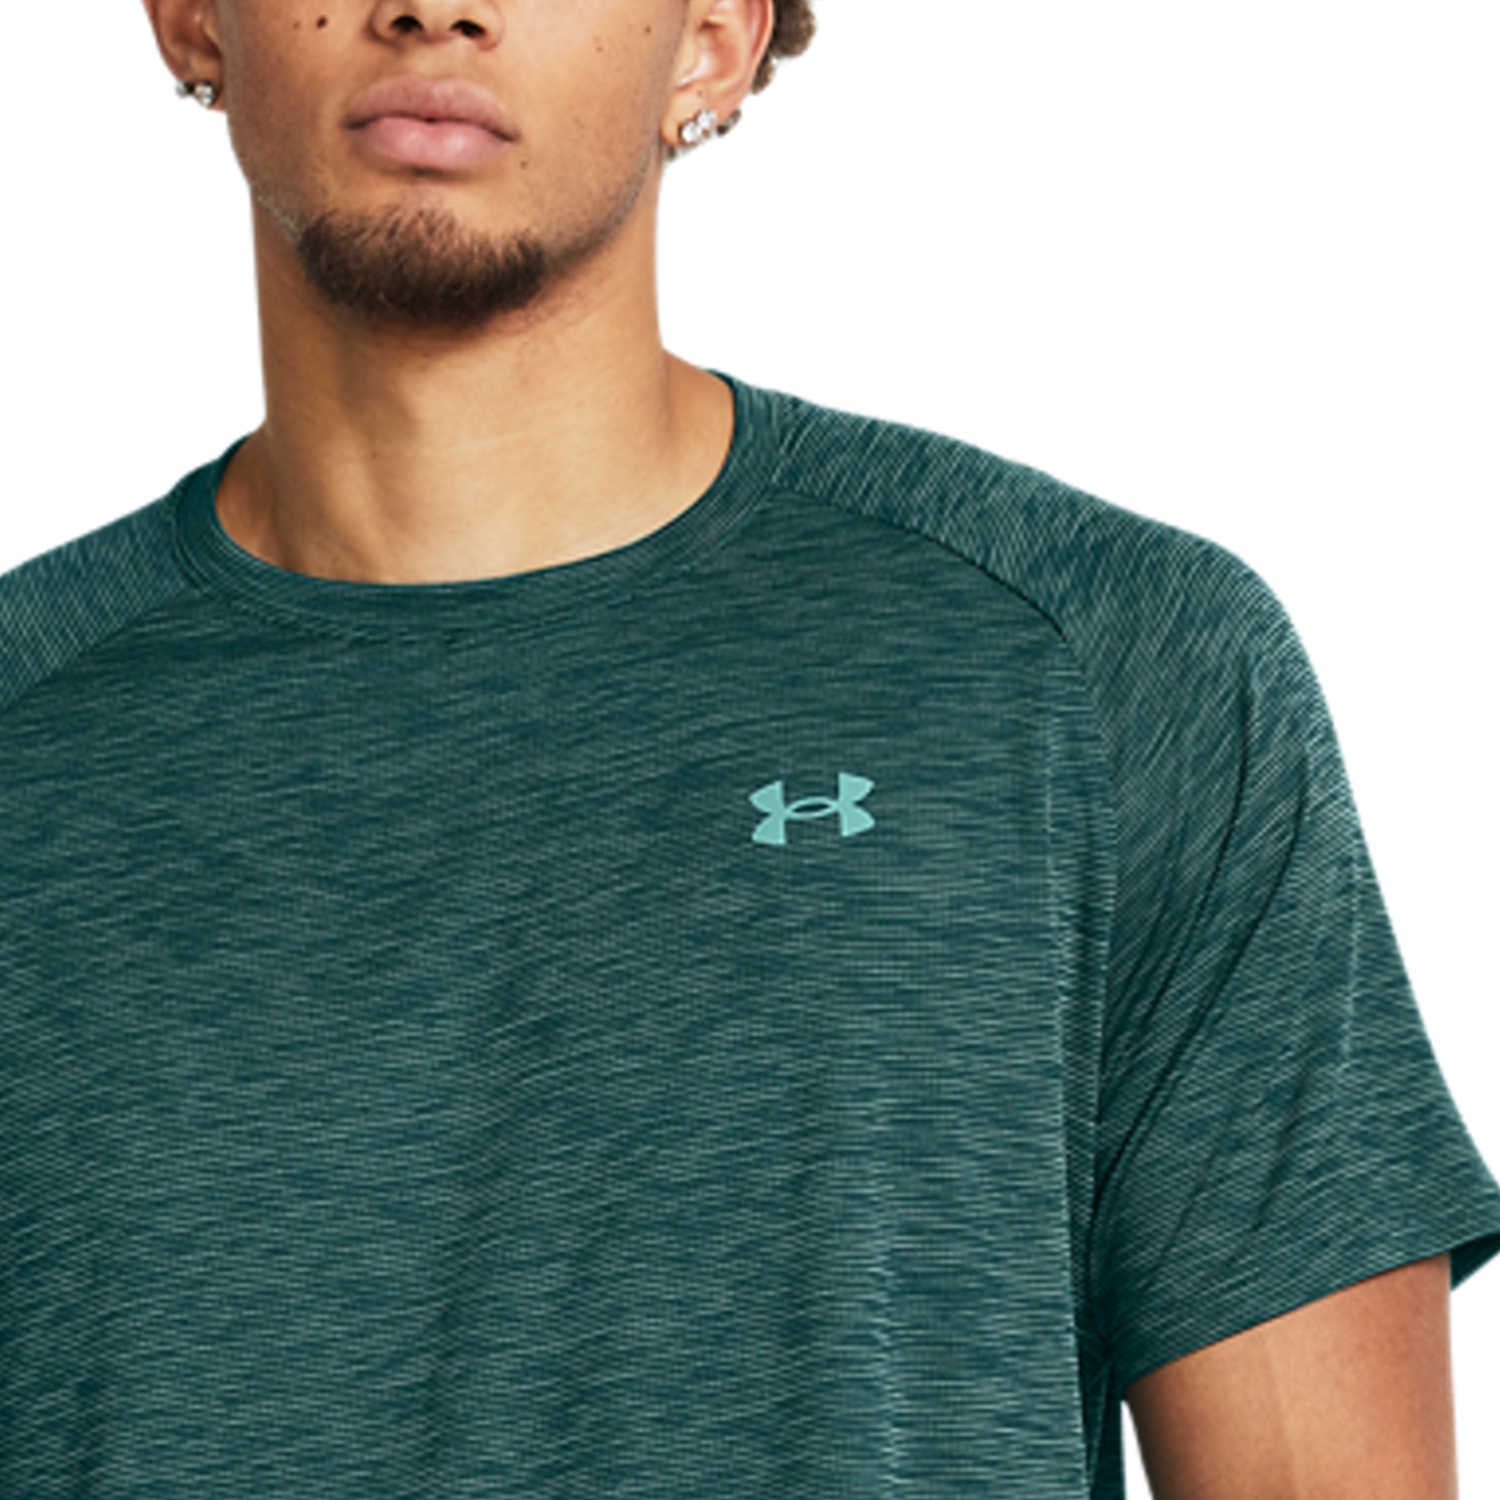 Under Armour Textured T-Shirt - Hydro Teal/Radial Turquoise